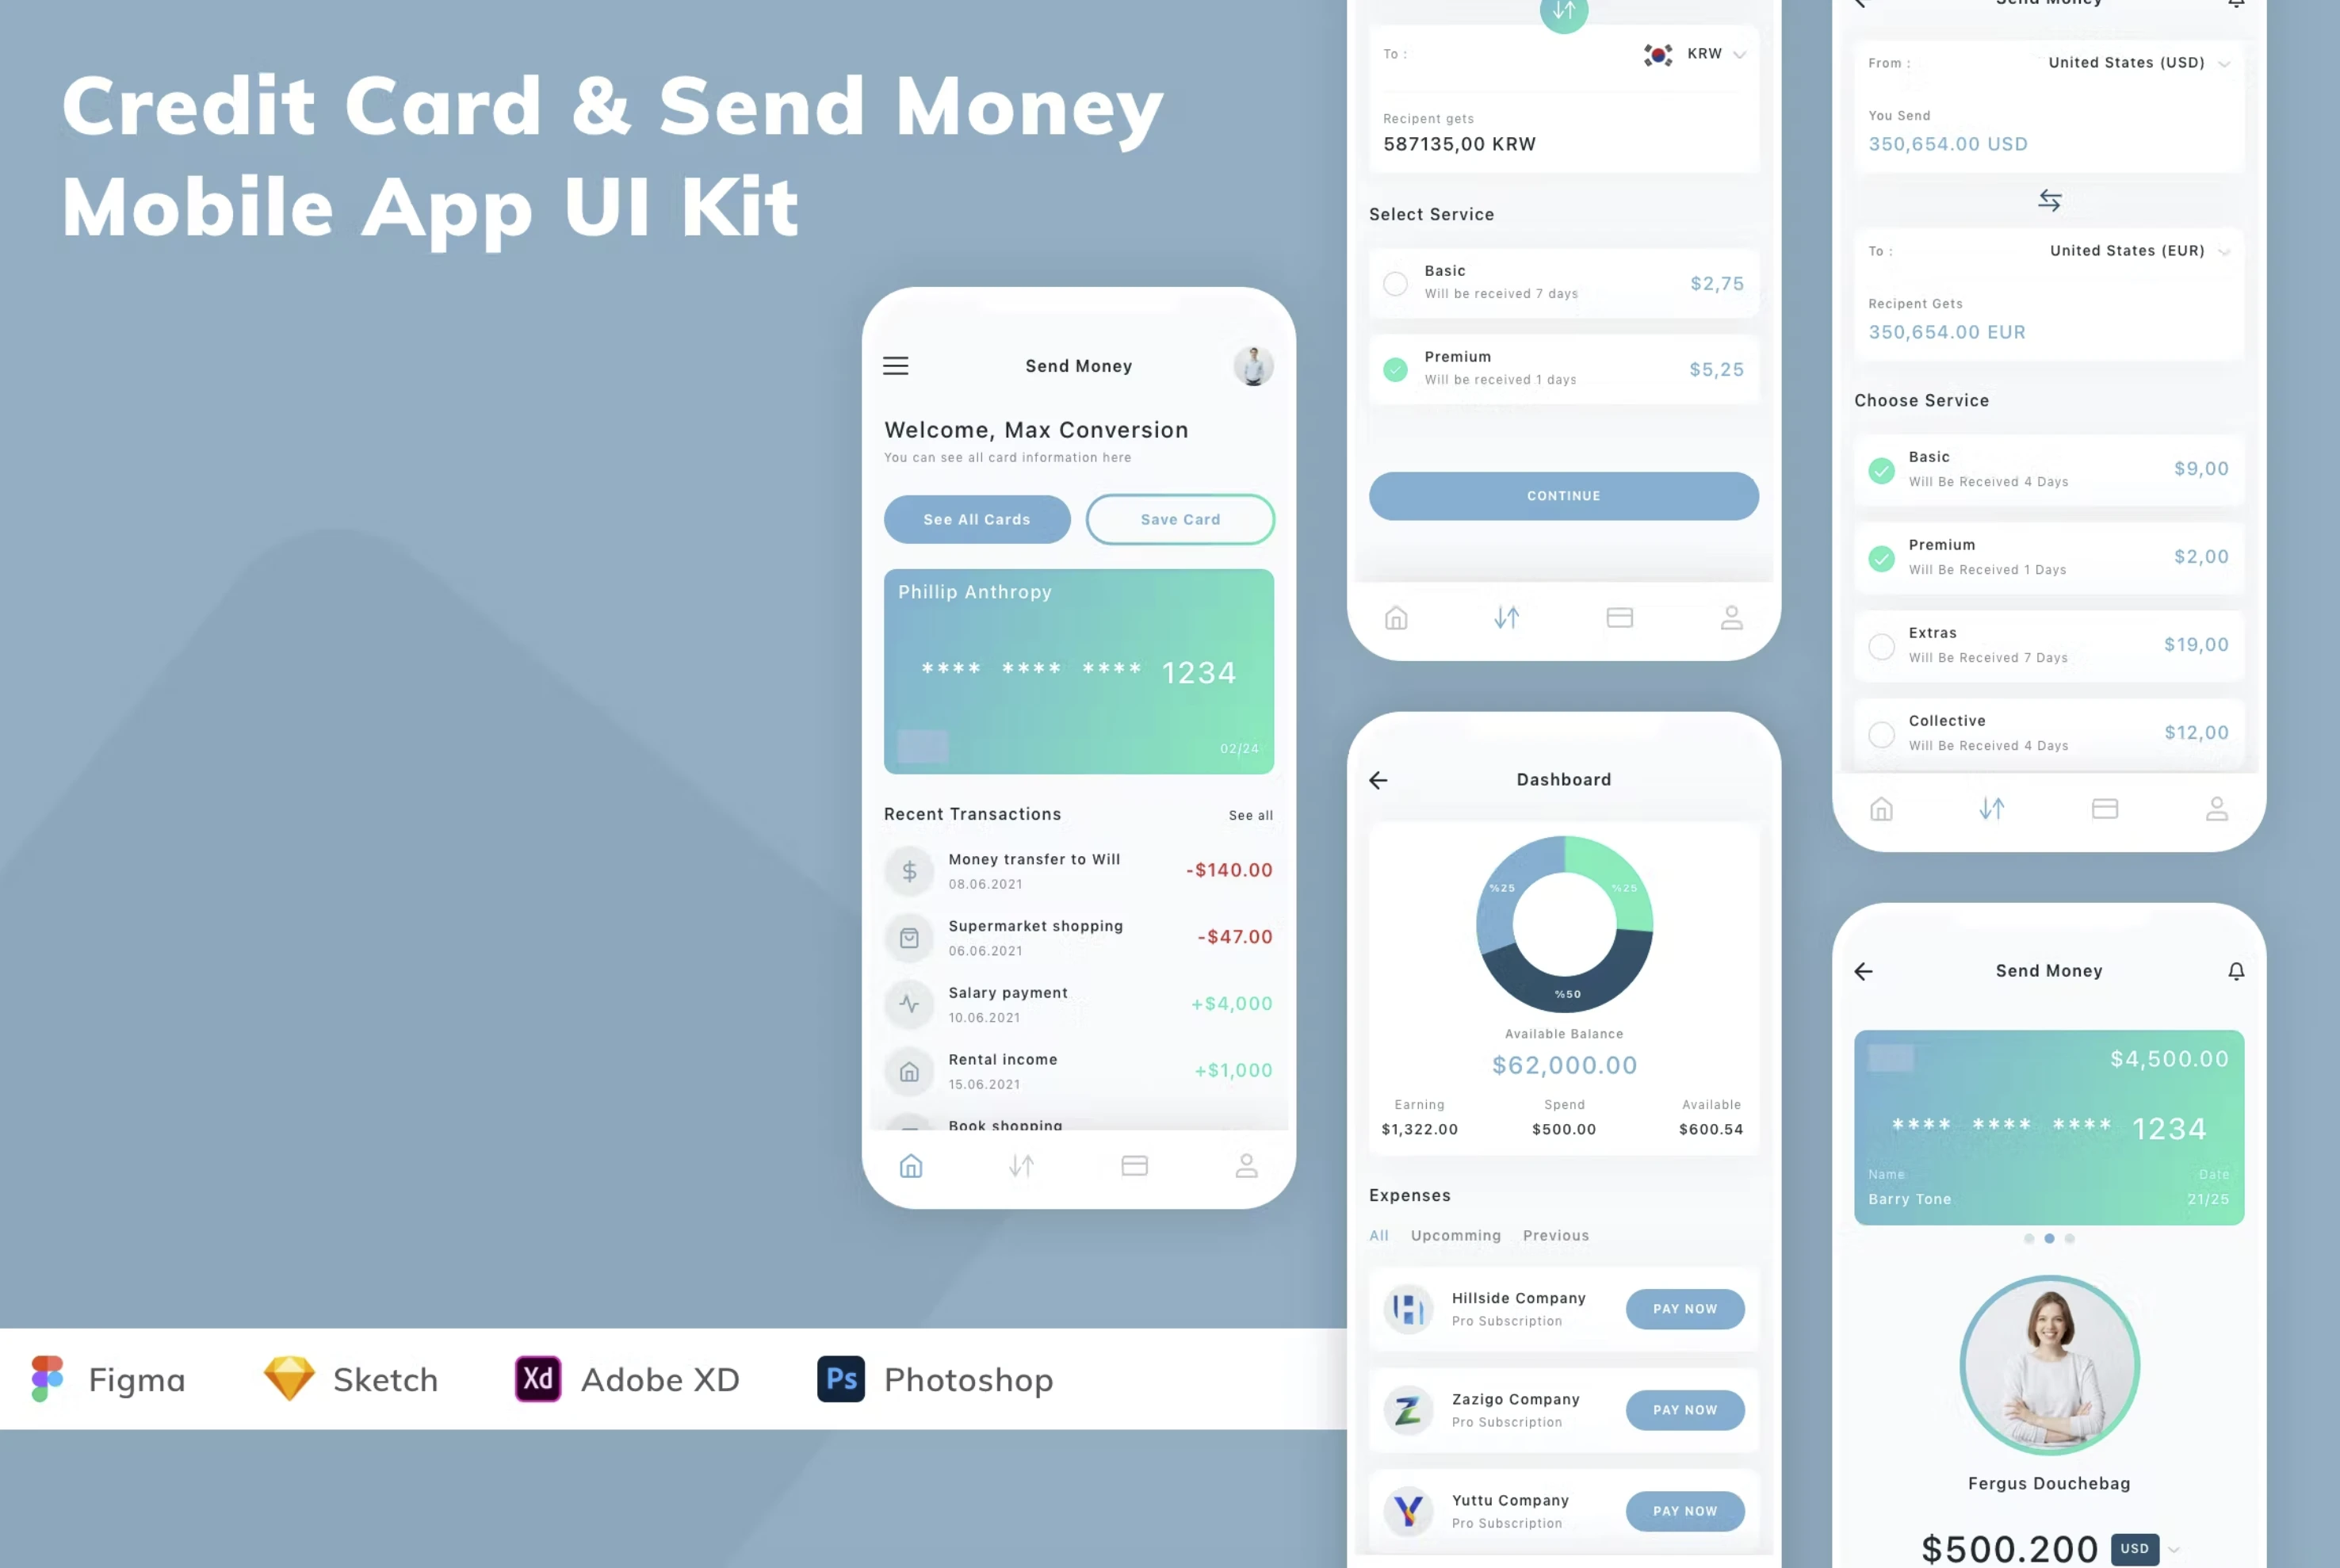 Figma UI kit - Credit Card & Send Money Mobile App (Community) for Figma and Adobe XD